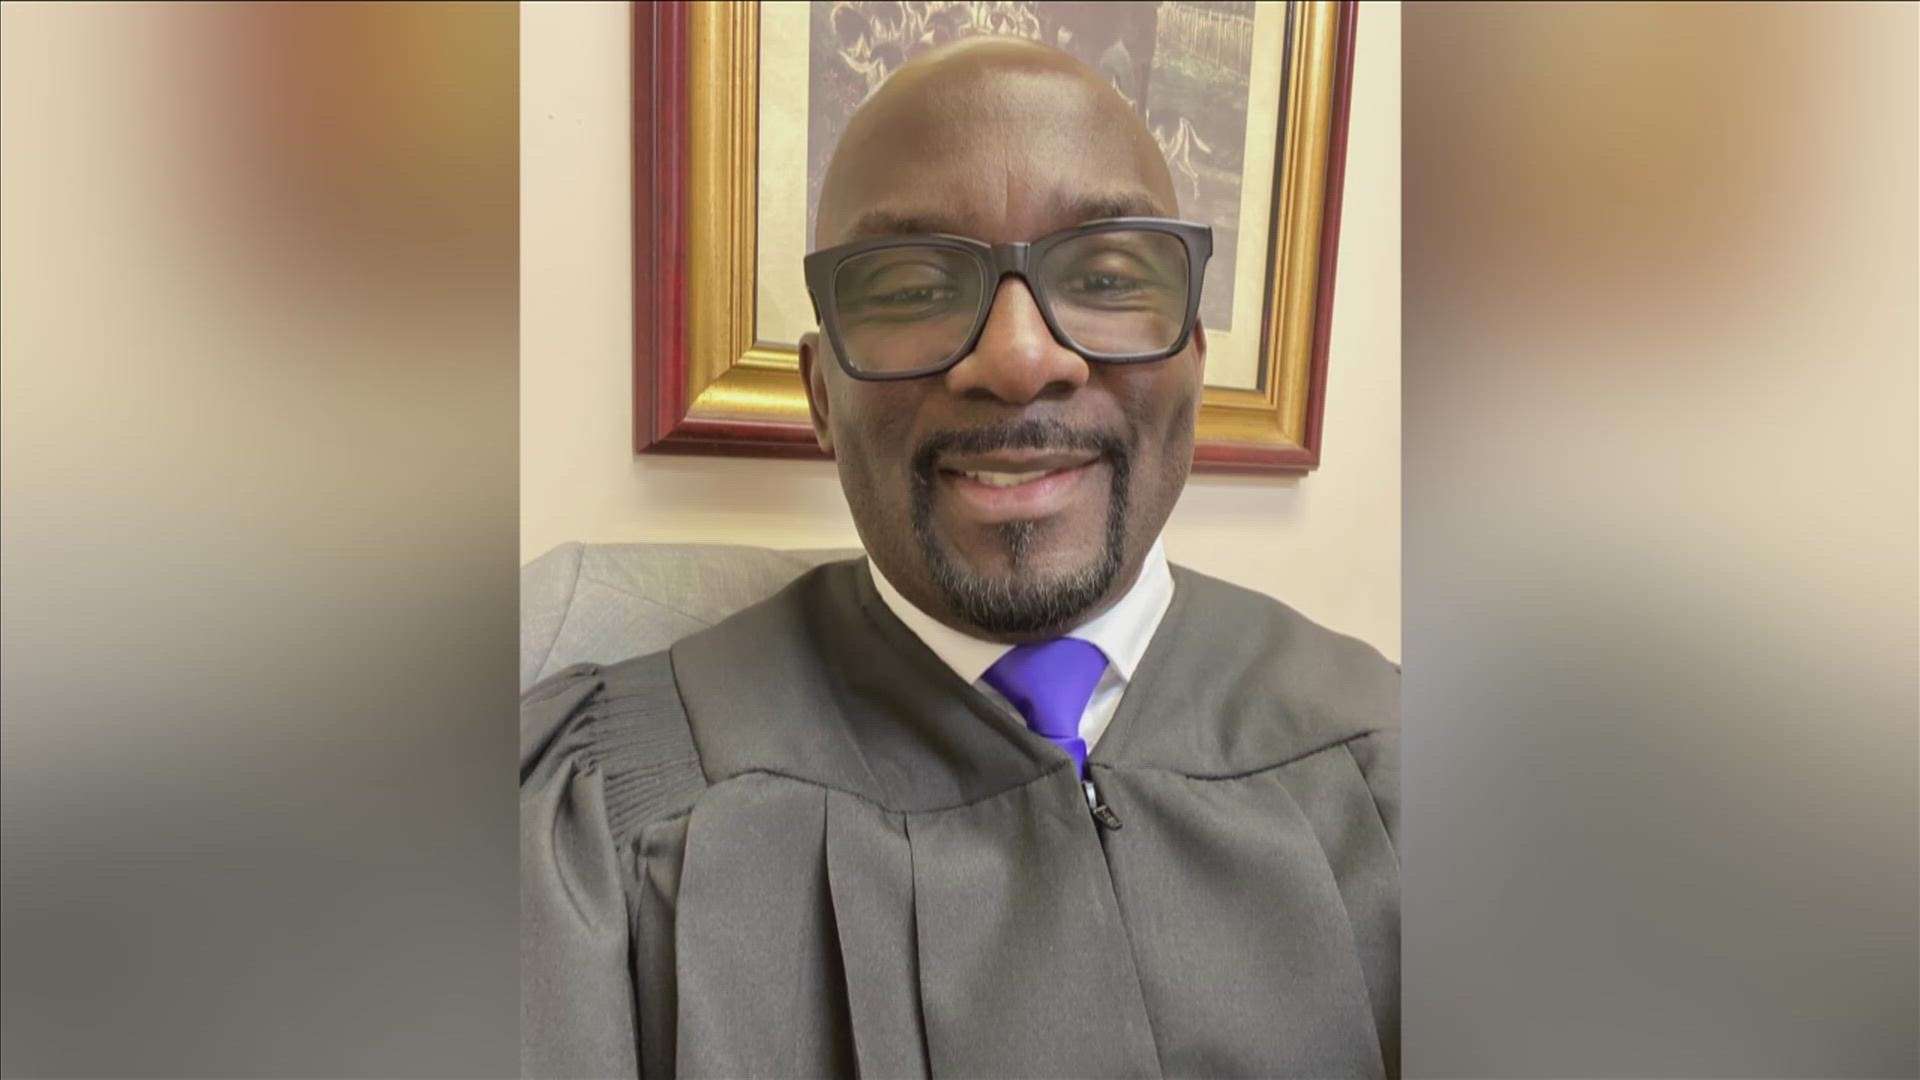 Judge Milton Williams made history when he became the first Black Polygrapher in the Mississippi Highway Patrol in the early 2000s.